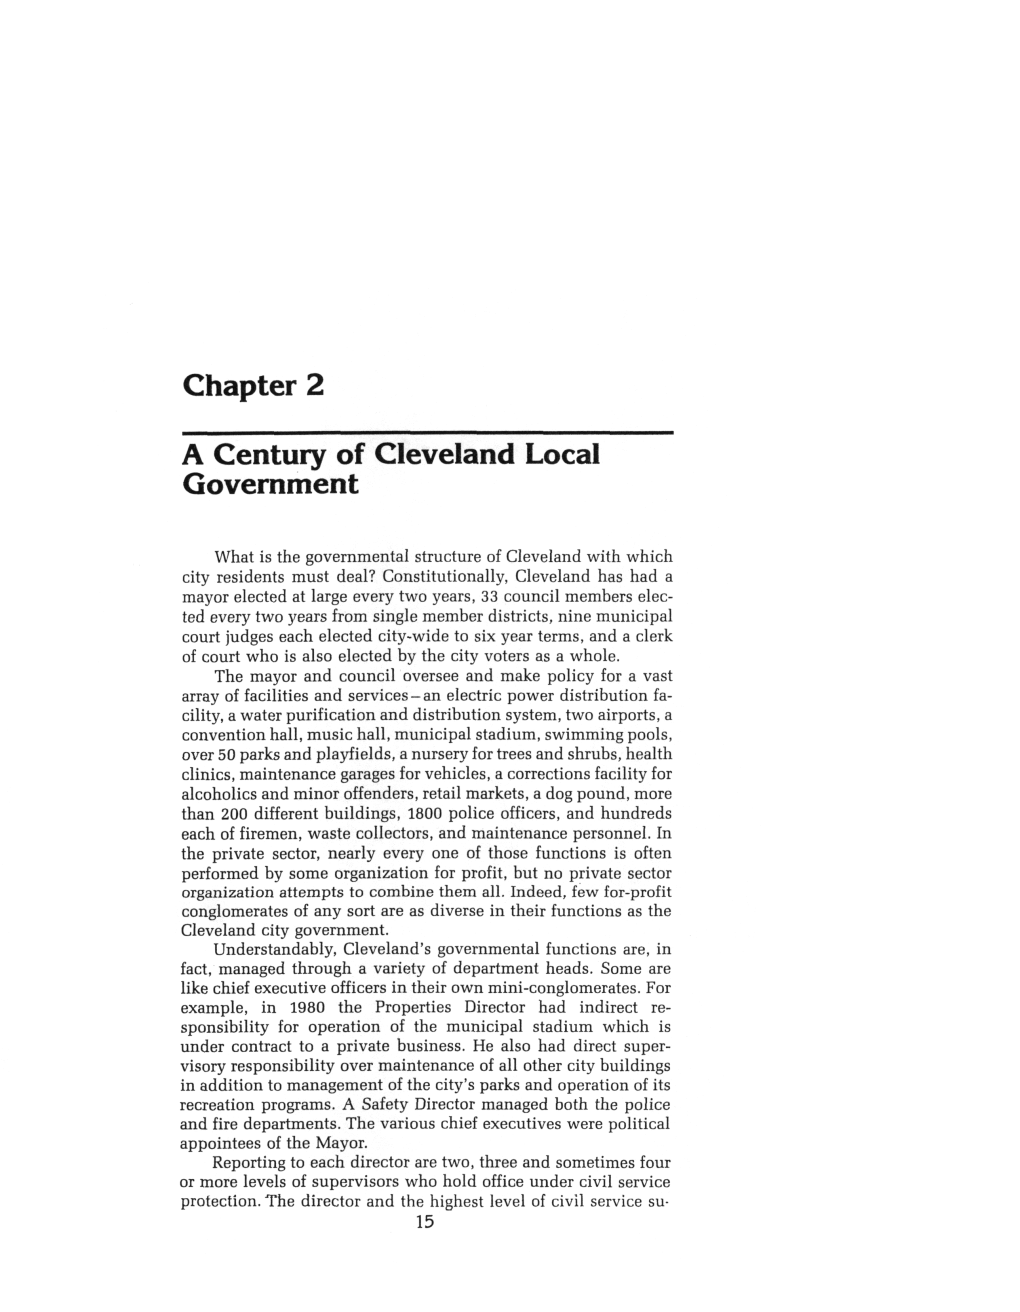 Chapter 2 a Century of Cleveland Local Government